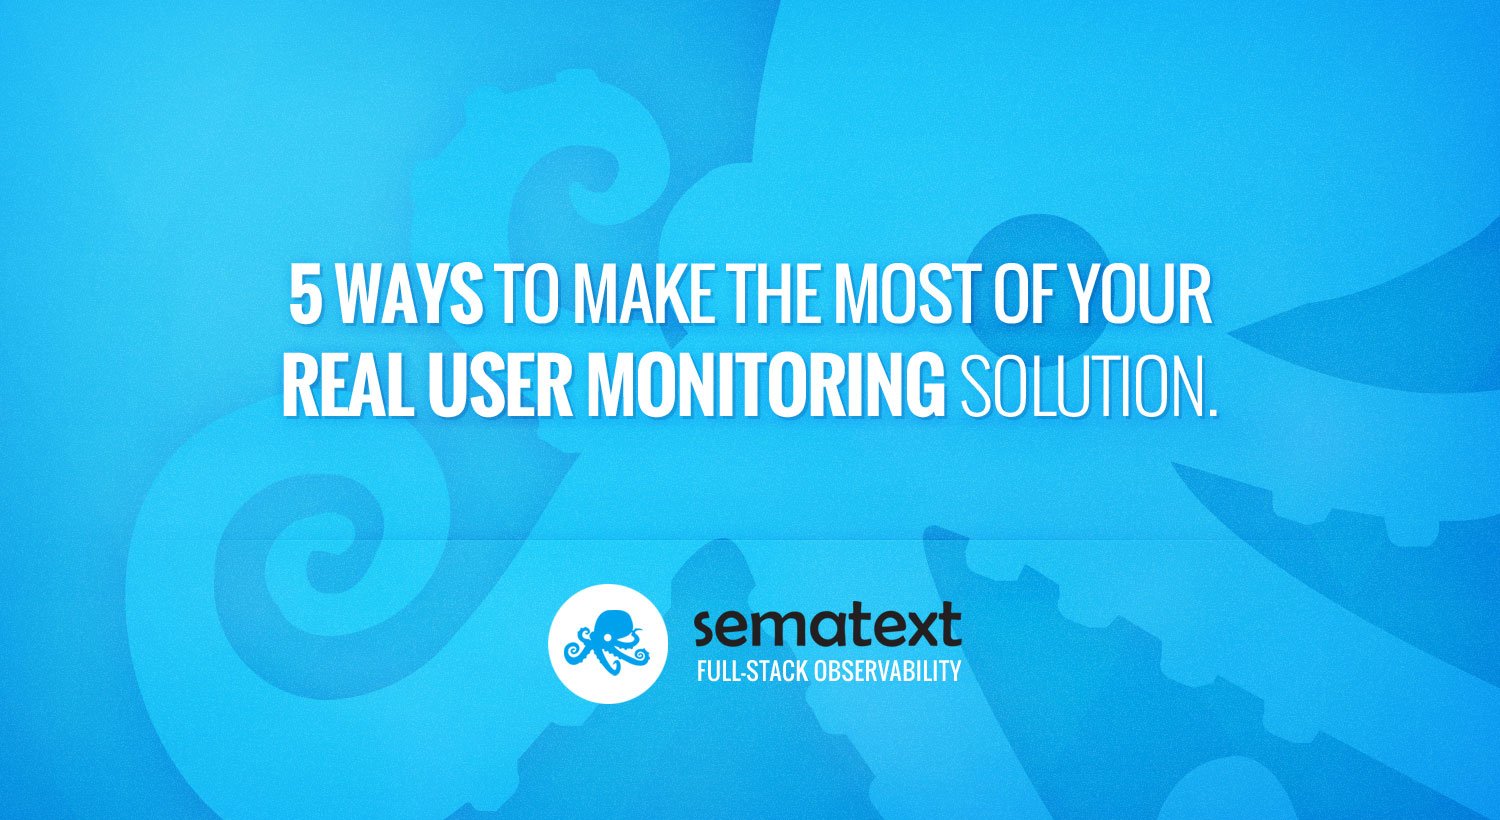 5 Best Practices for Real User Monitoring